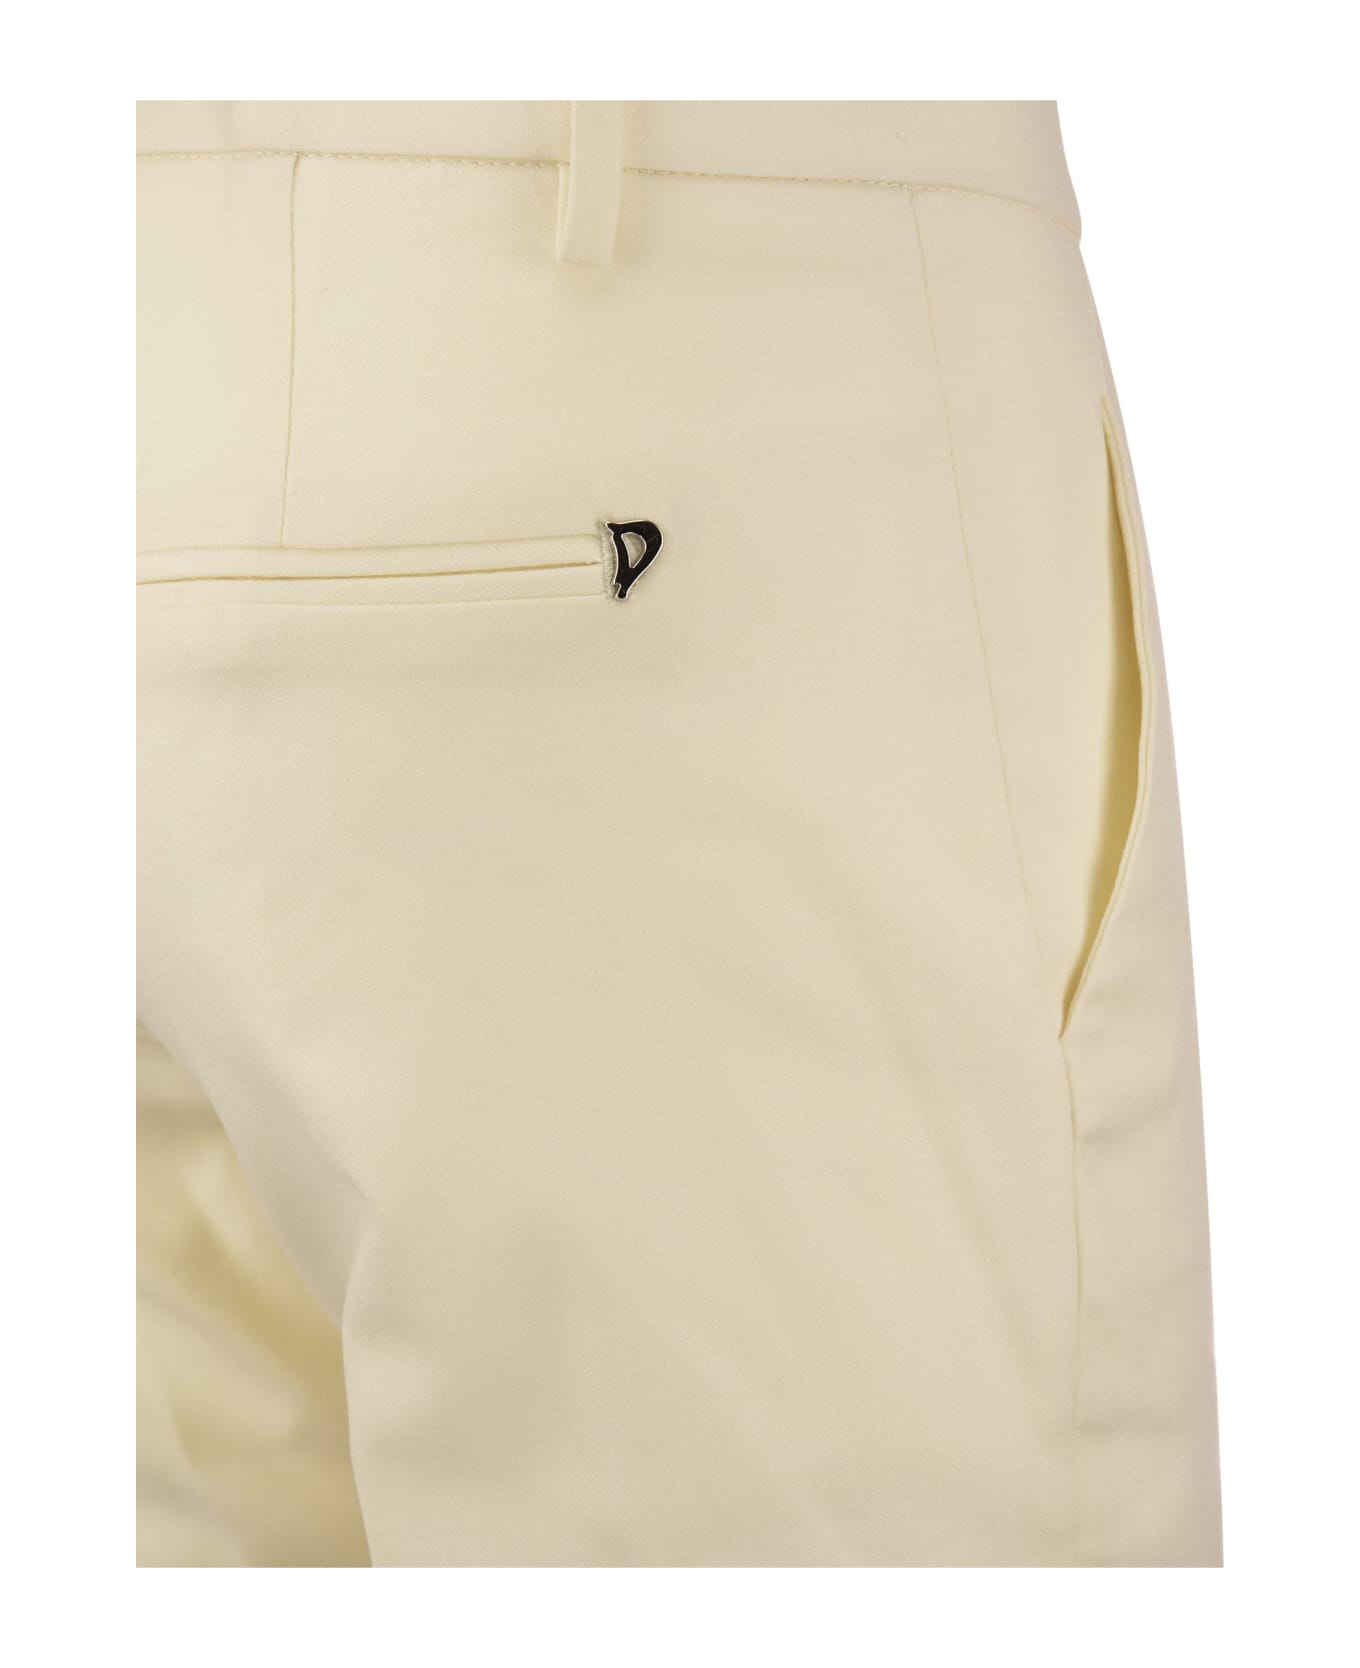 Dondup Perfect - Wool Slim-fit Trousers - Cream